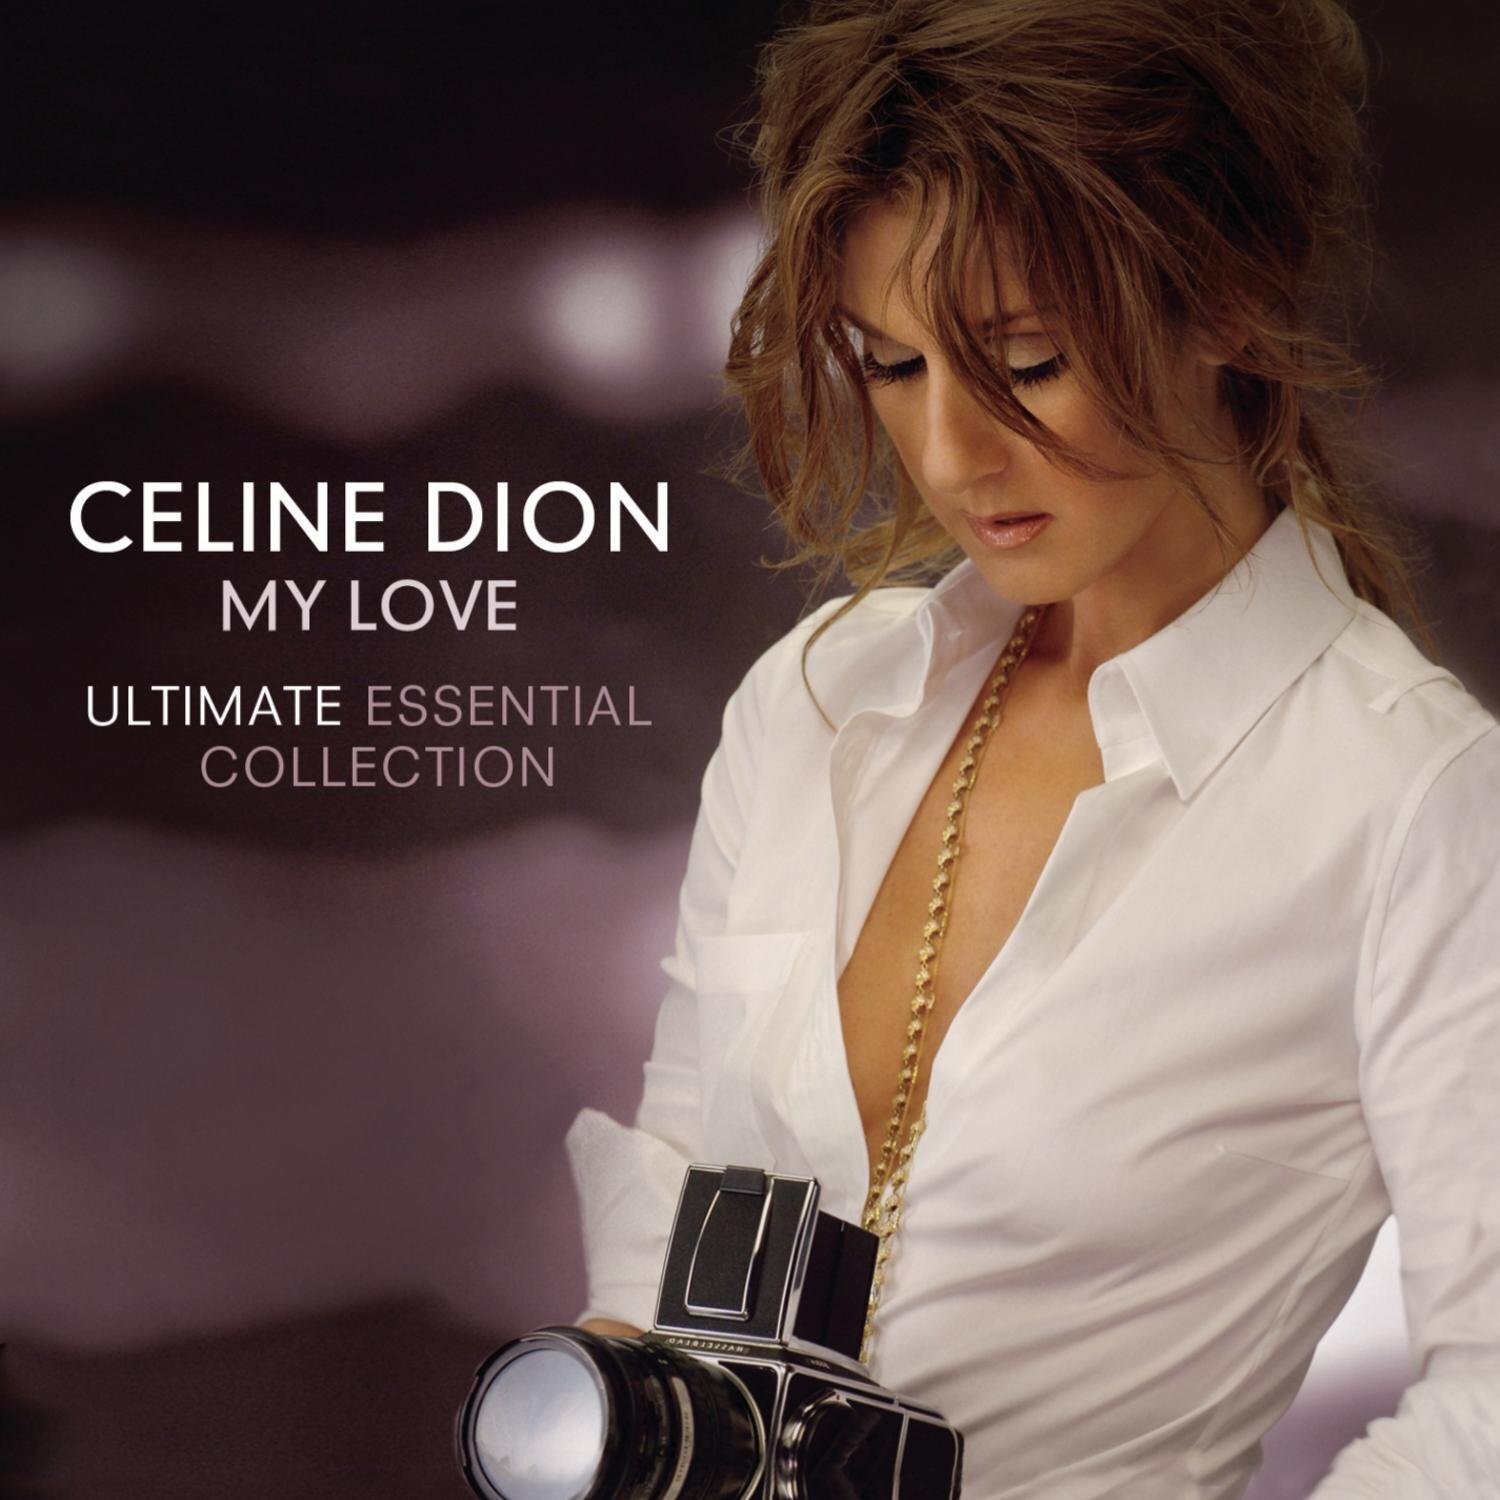 (10) My Love Ultimate Essential Collection - Celine Dion.jpg